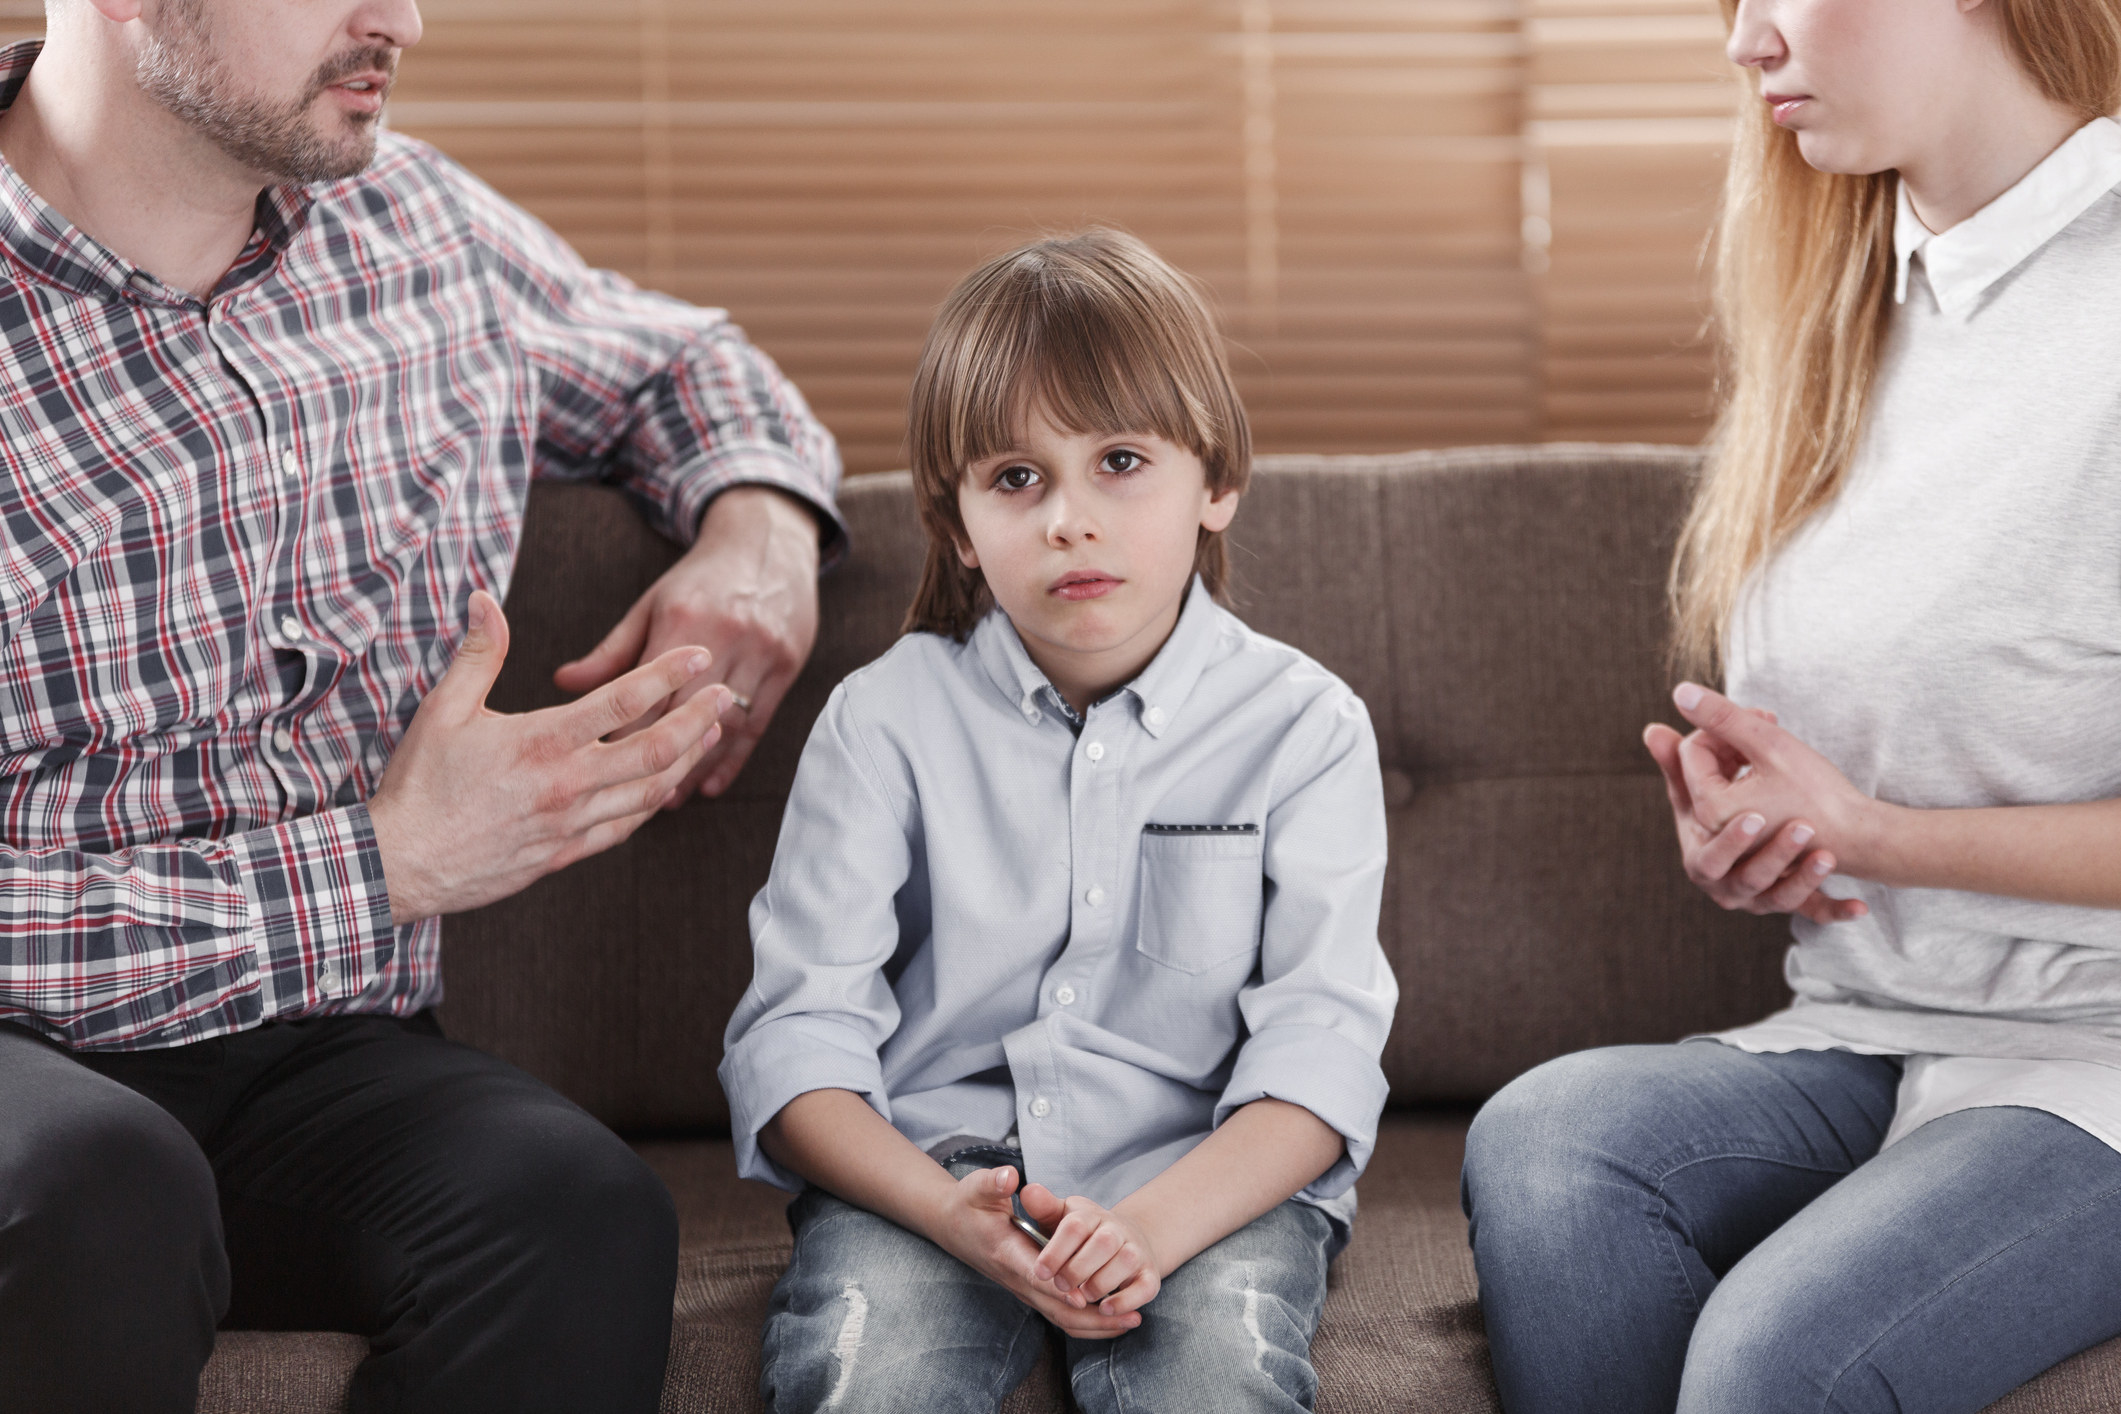 Sad young boy sitting in-between fighting parents